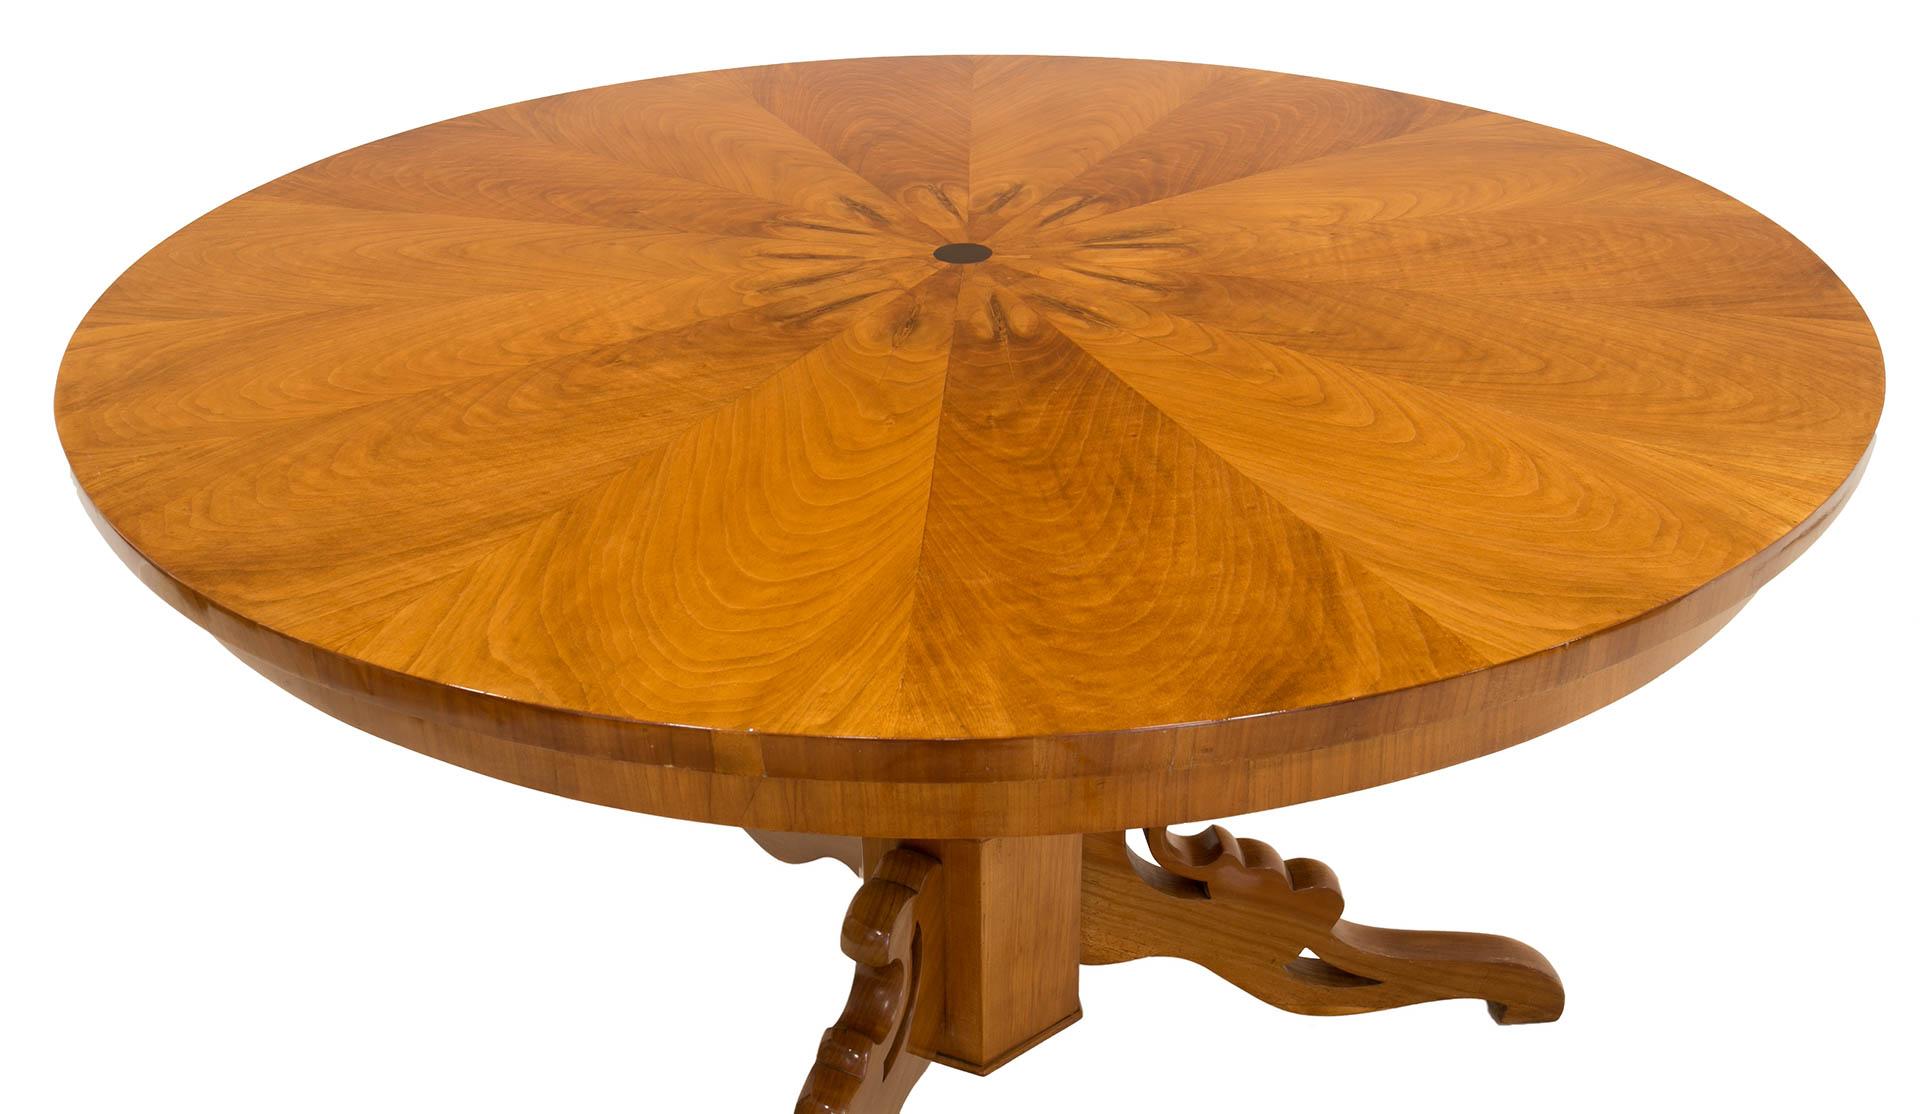 This Biedermeier round table was made in Germany in 19th century. It is supported on a beautifully sculpted leg made of cherrywood, the tabletop is also veneered with cherrywood. The piece has been refinished with varnish which besides great visual